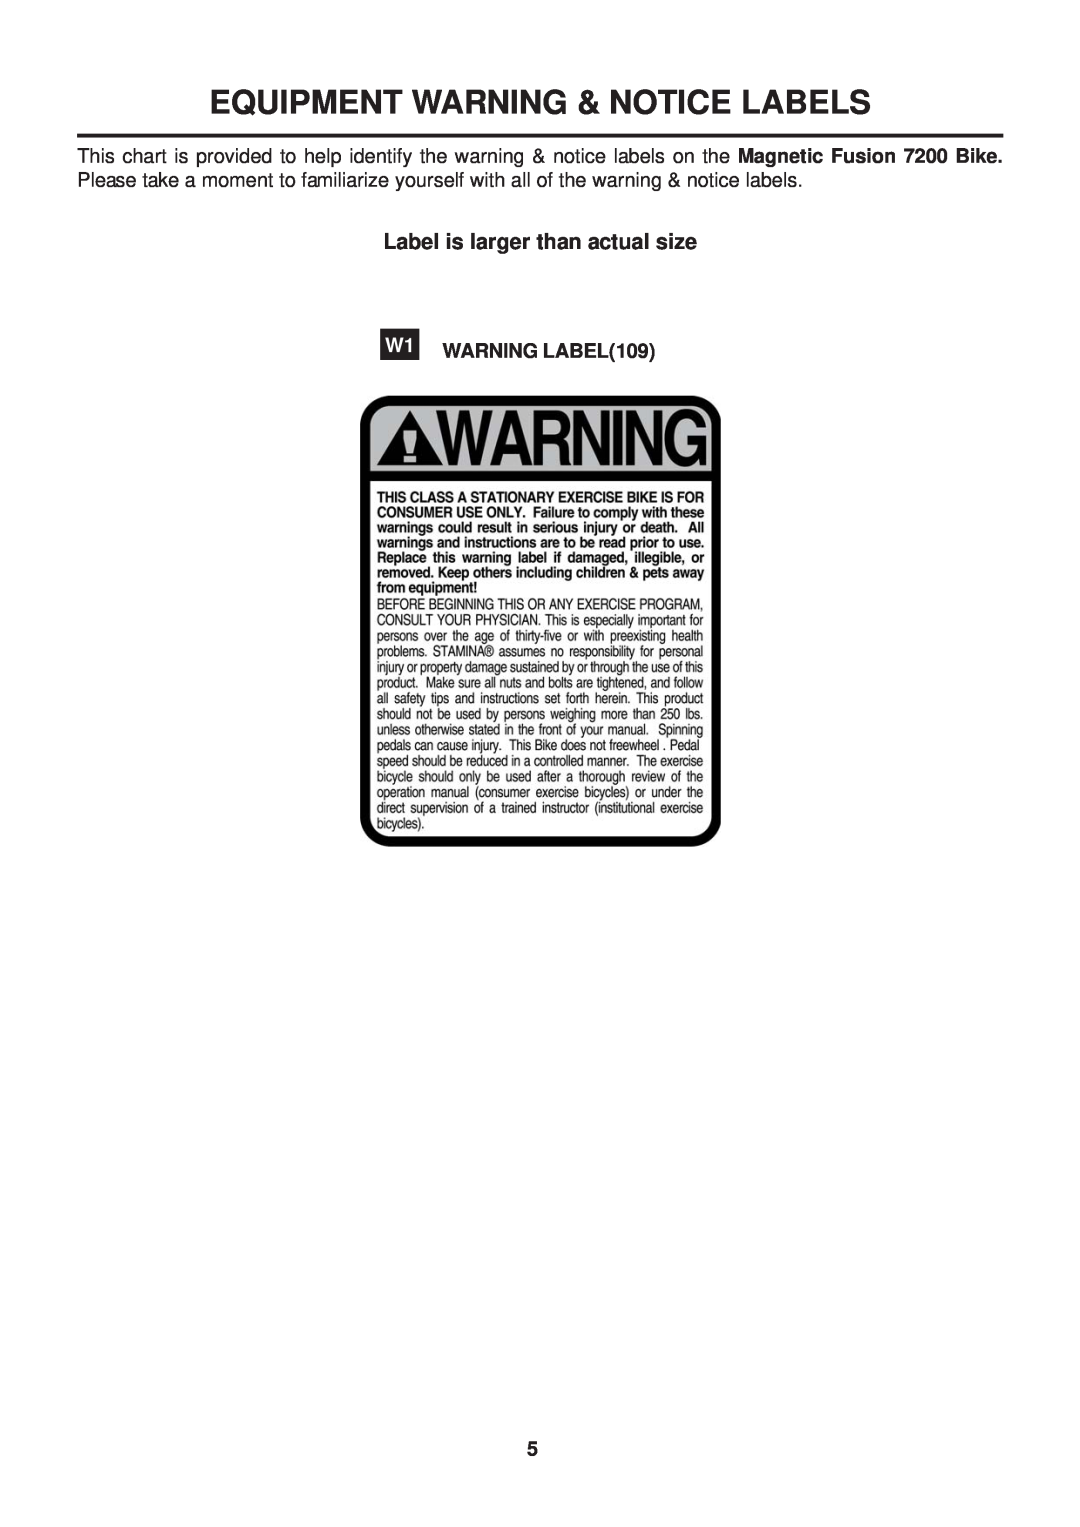 Stamina Products 15-7200 owner manual Equipment Warning & Notice Labels, Label is larger than actual size 